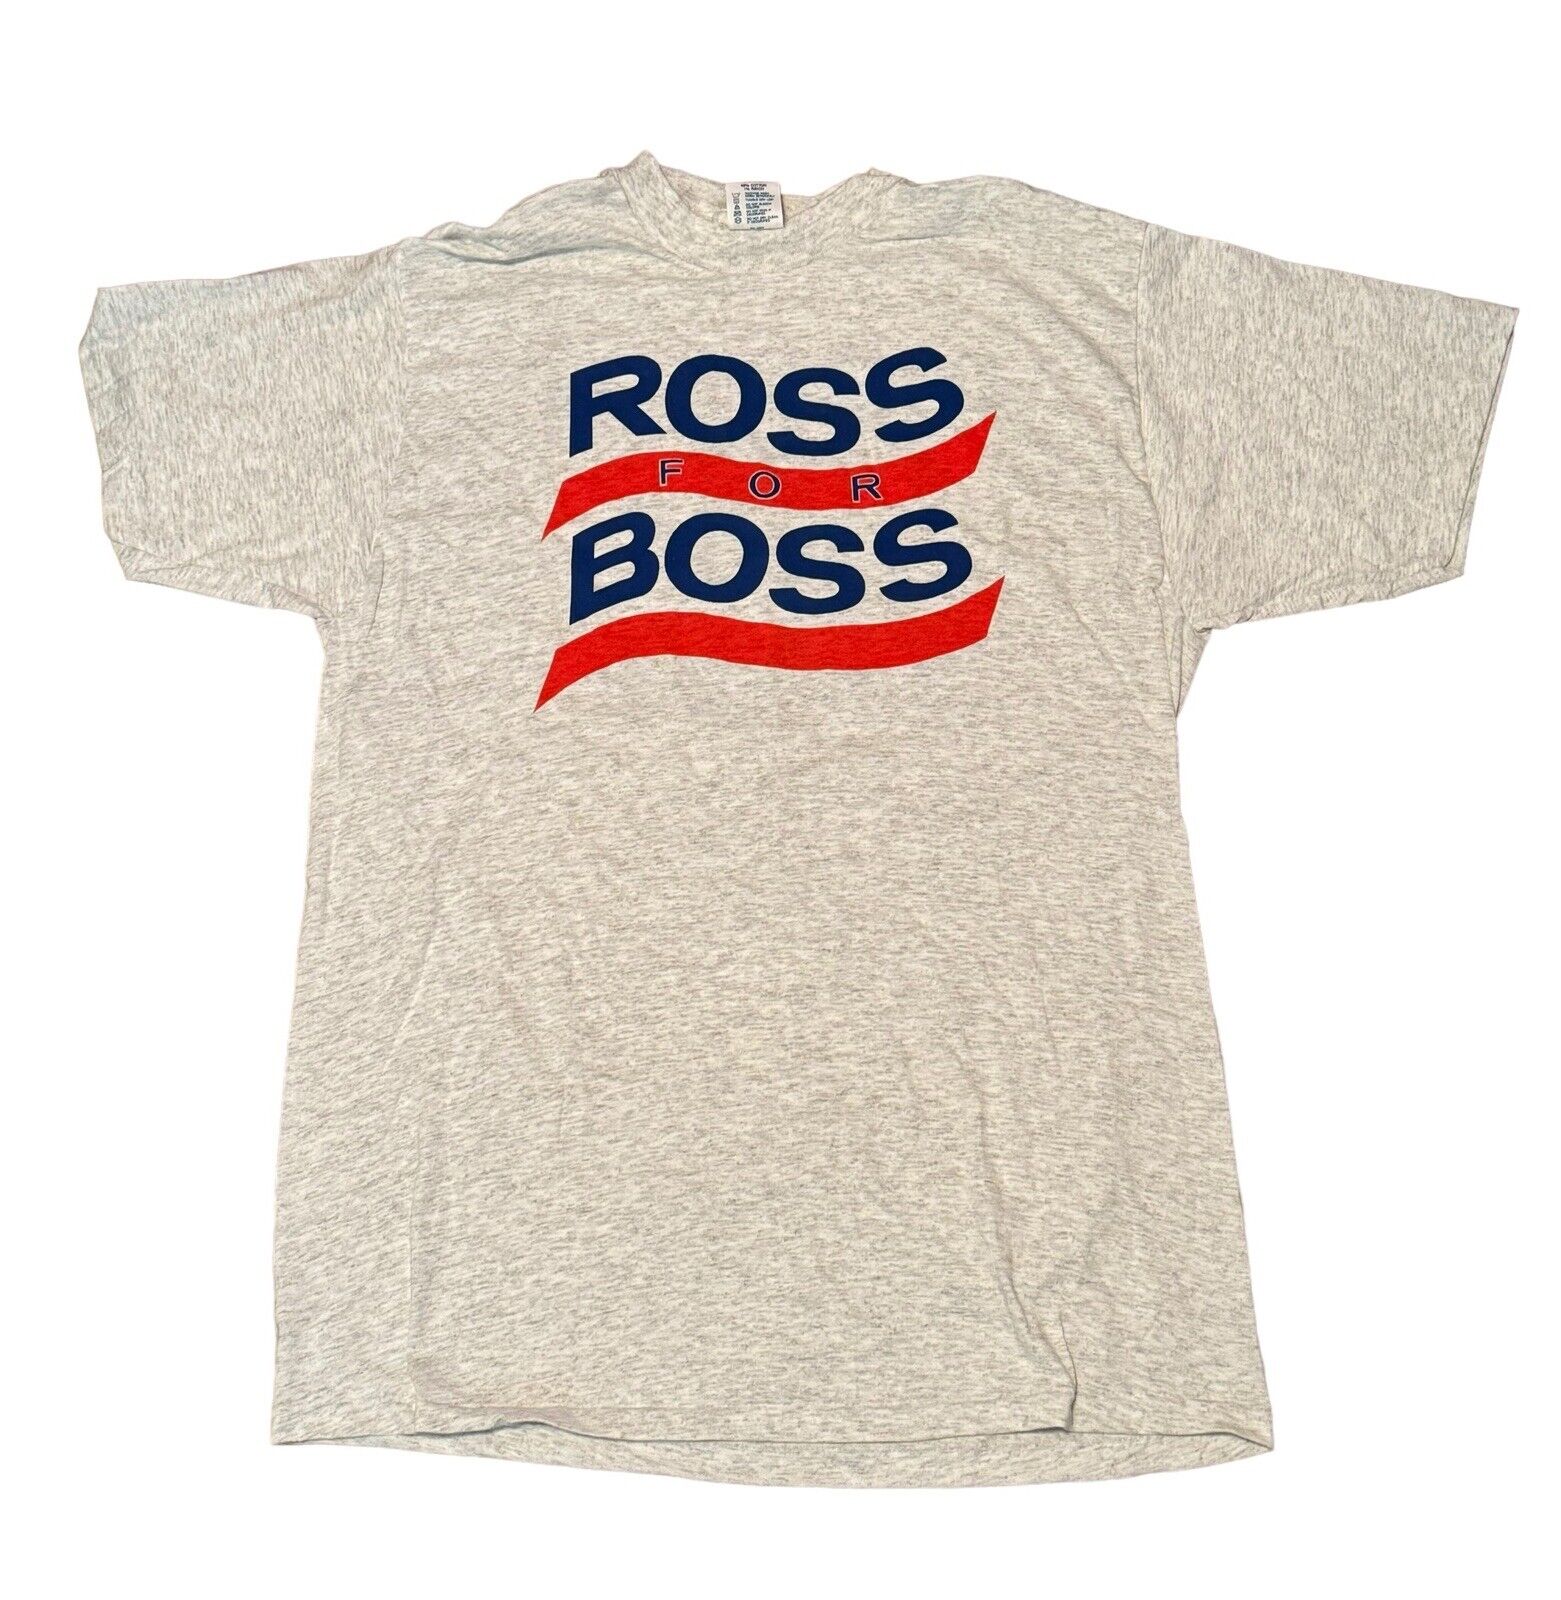 Vintage Ross Perot 1992 Presidential Campaign T Shirt Ross For Boss New Jersey